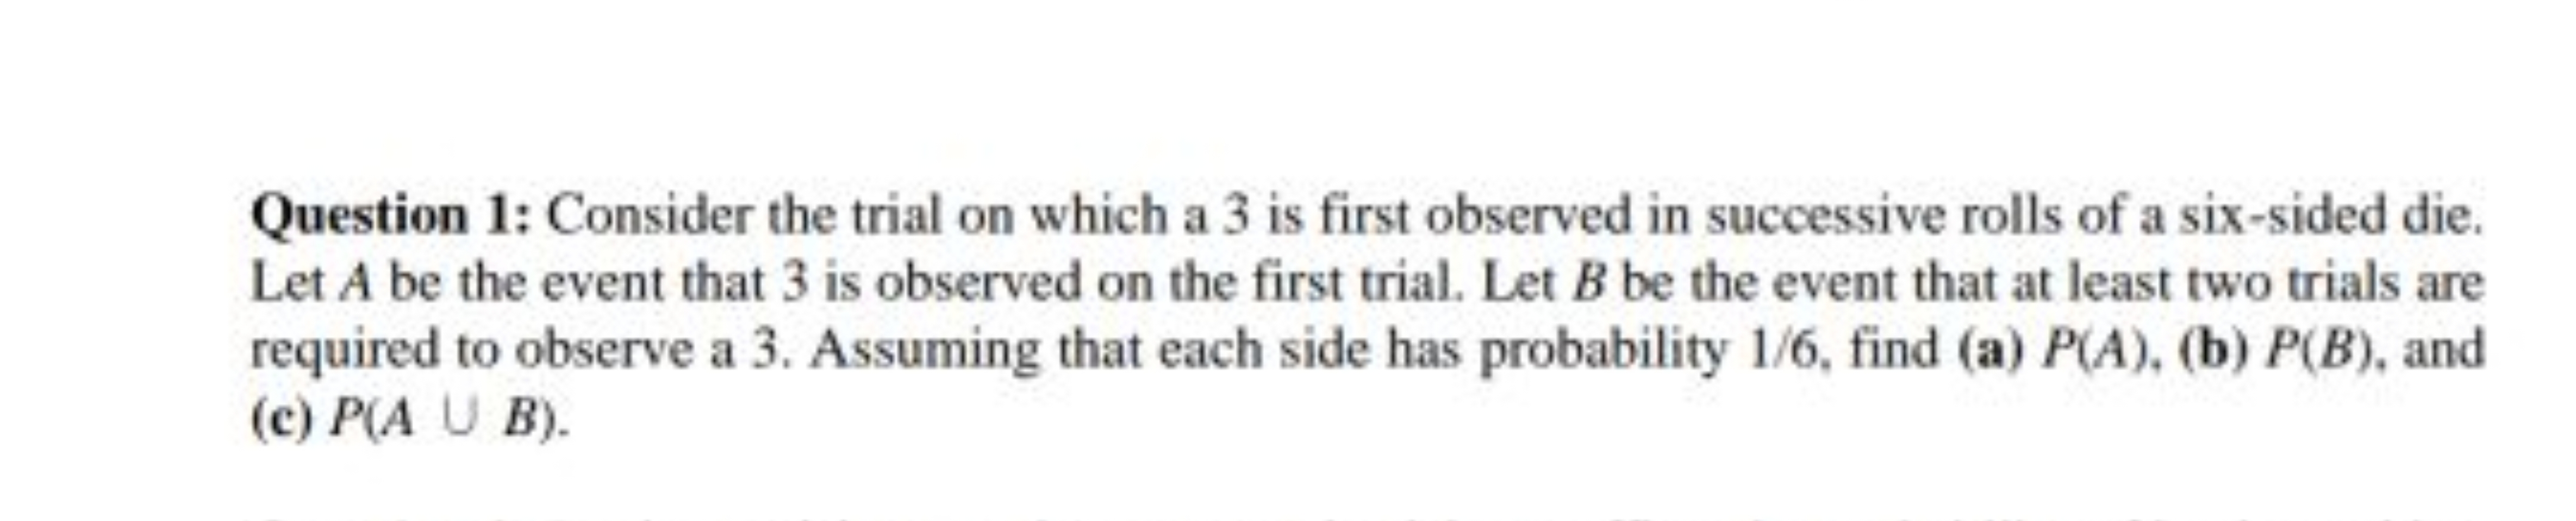 Question 1: Consider the trial on which a 3 is first observed in succe